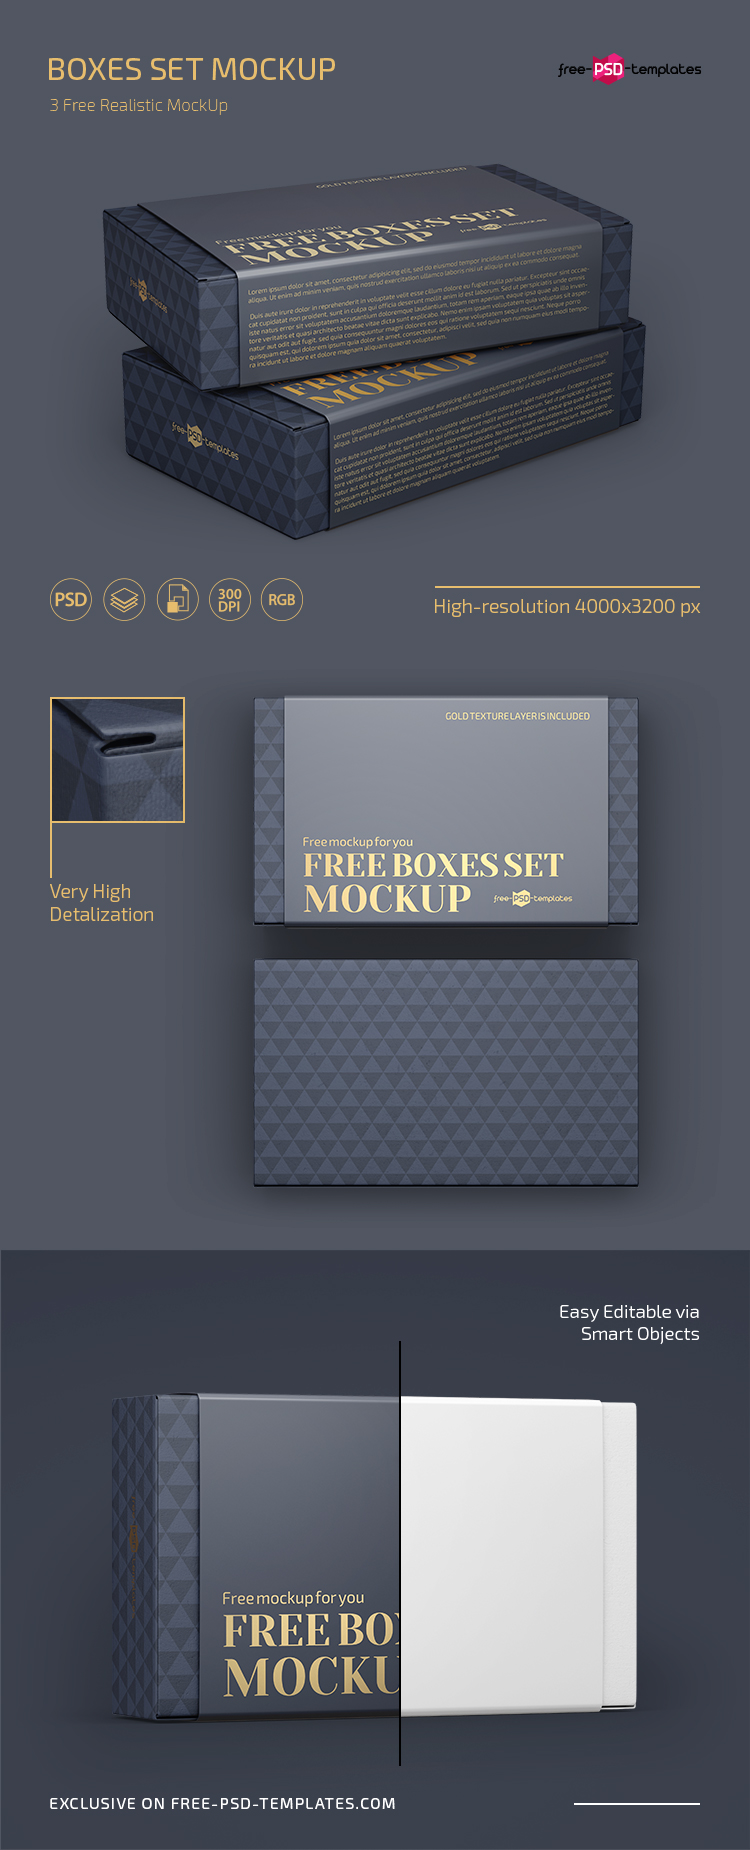 Download Free Boxes Set Mockup Templates in PSD | Free PSD Templates